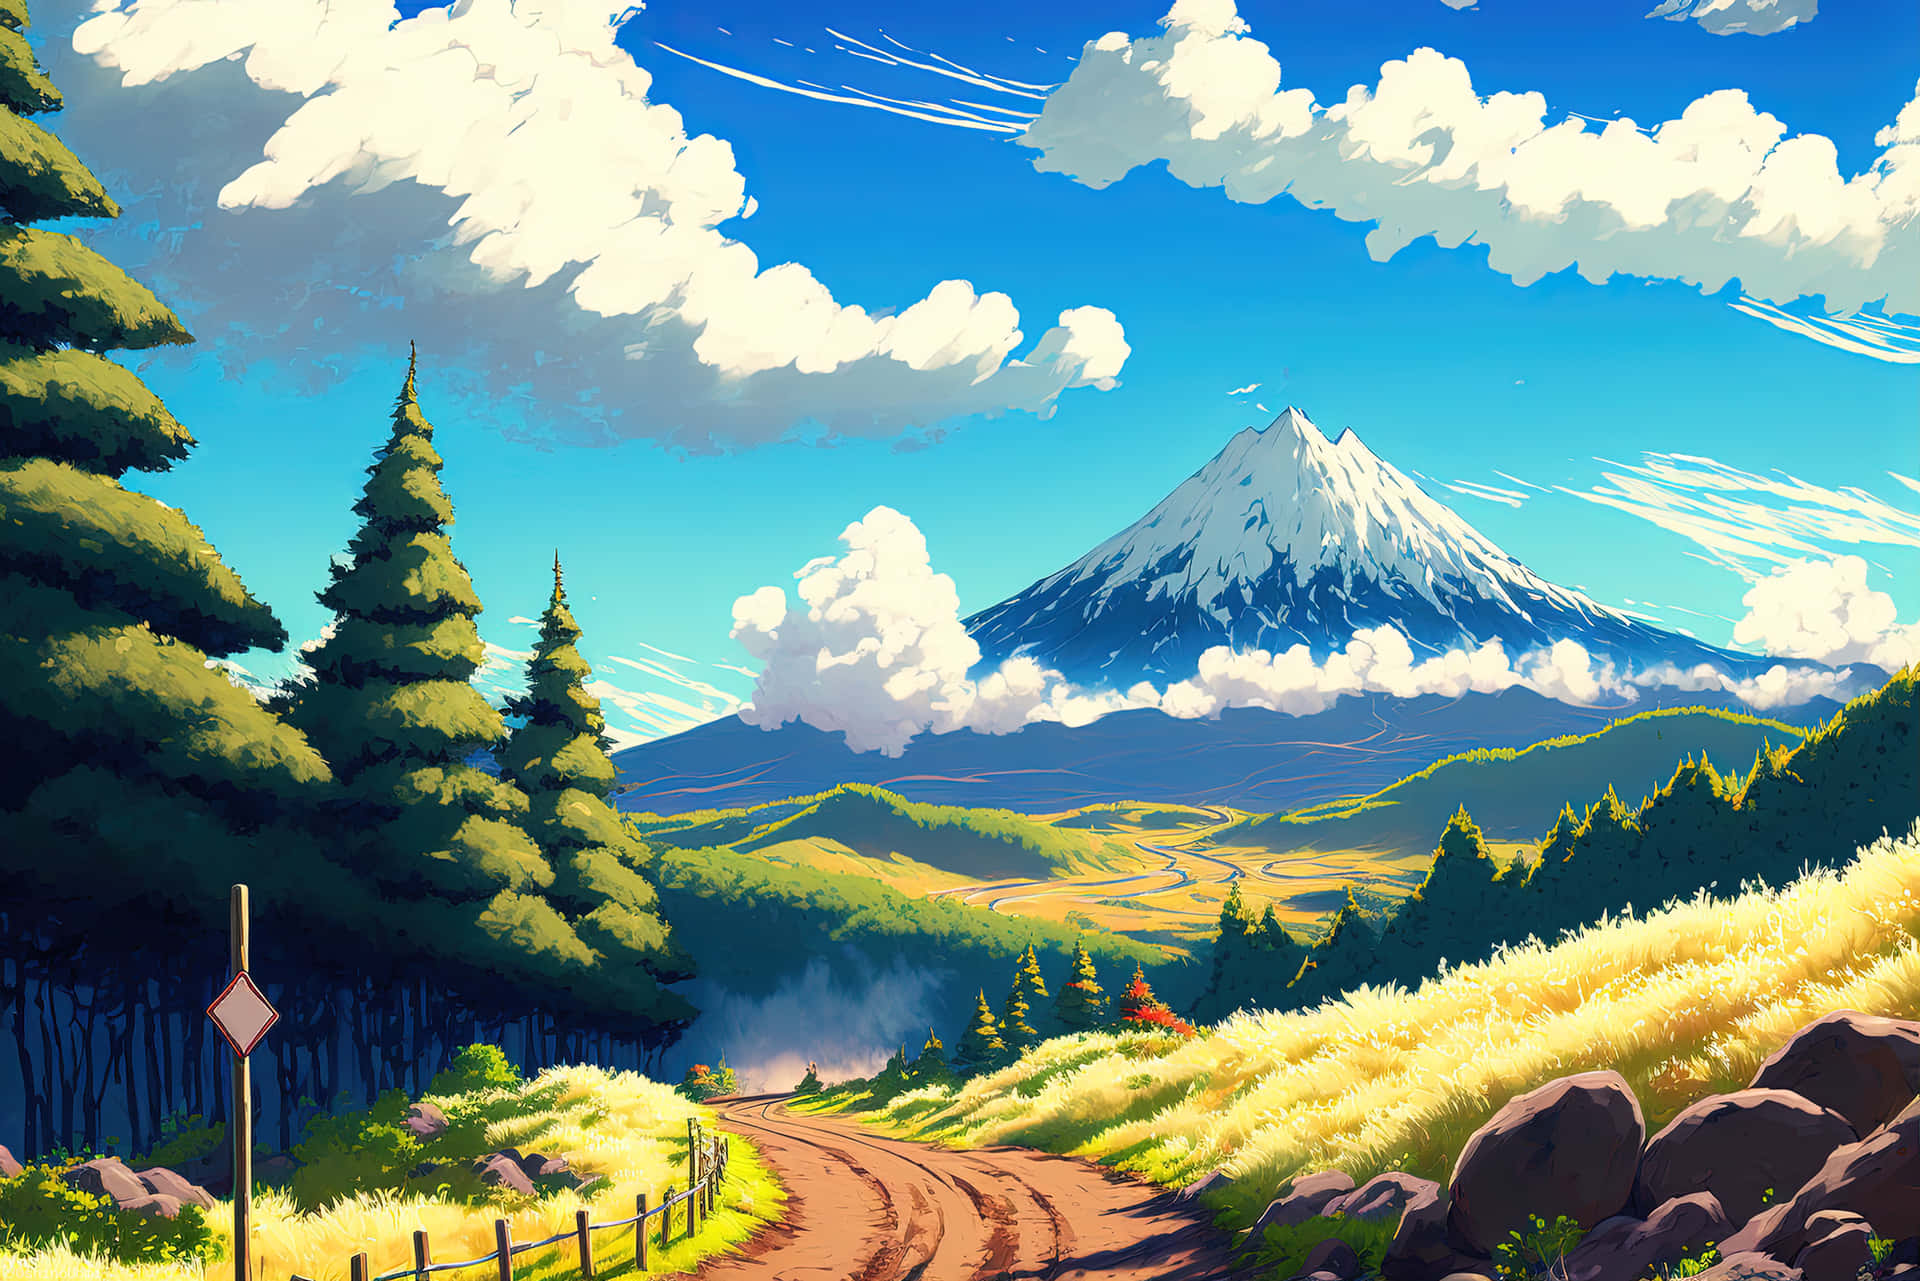 Lush meadows and pixelated mountains span the horizon in this peaceful landscape. Wallpaper